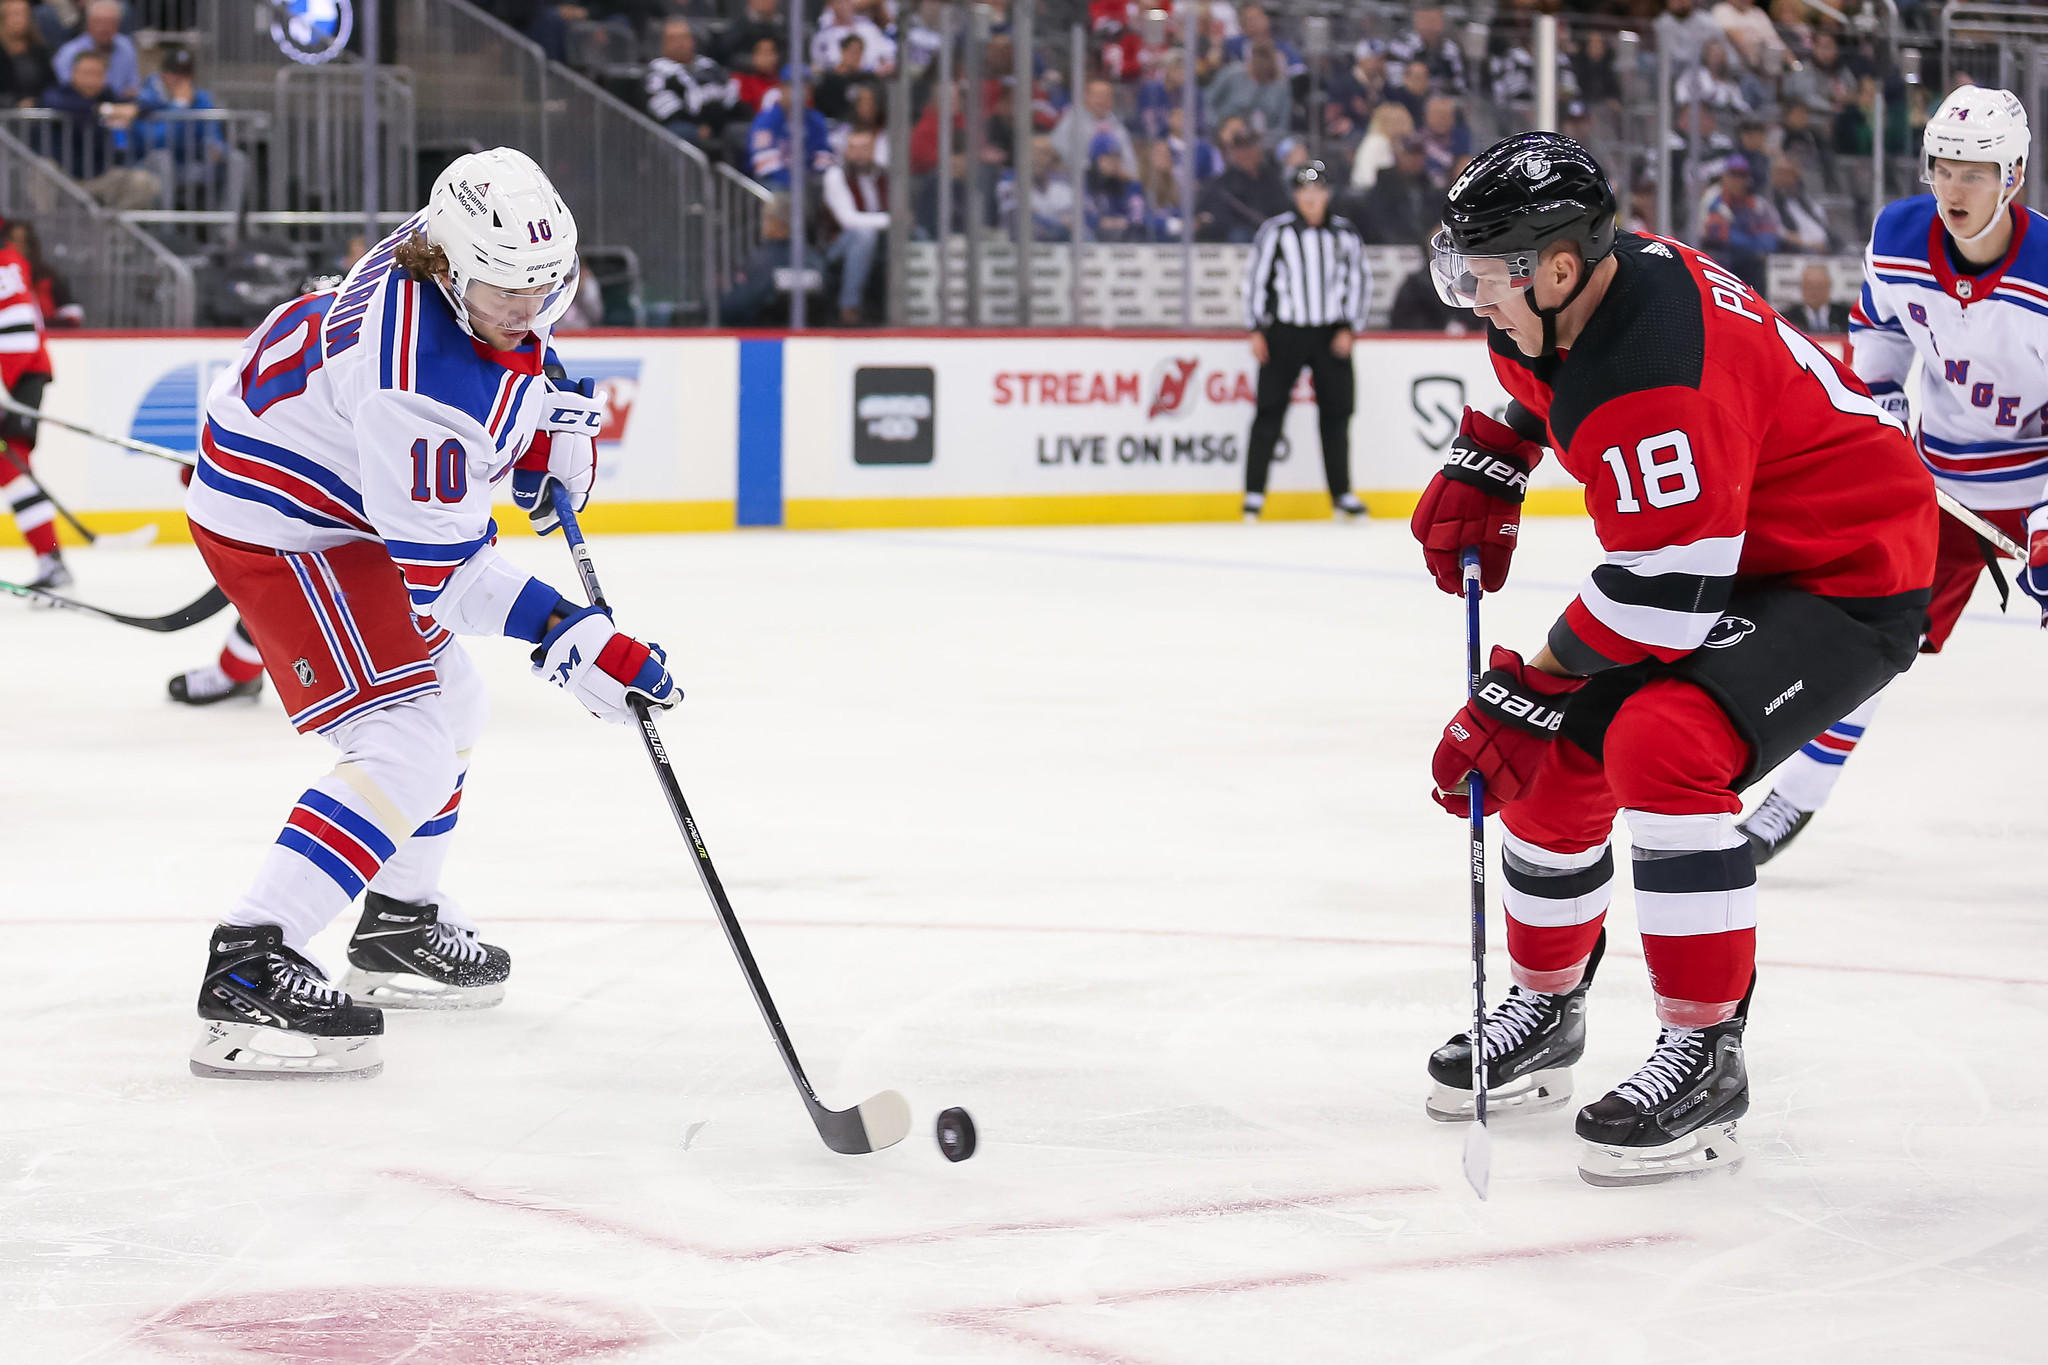 Rangers-Devils Playoff Series Would Reignite Their Rivalry